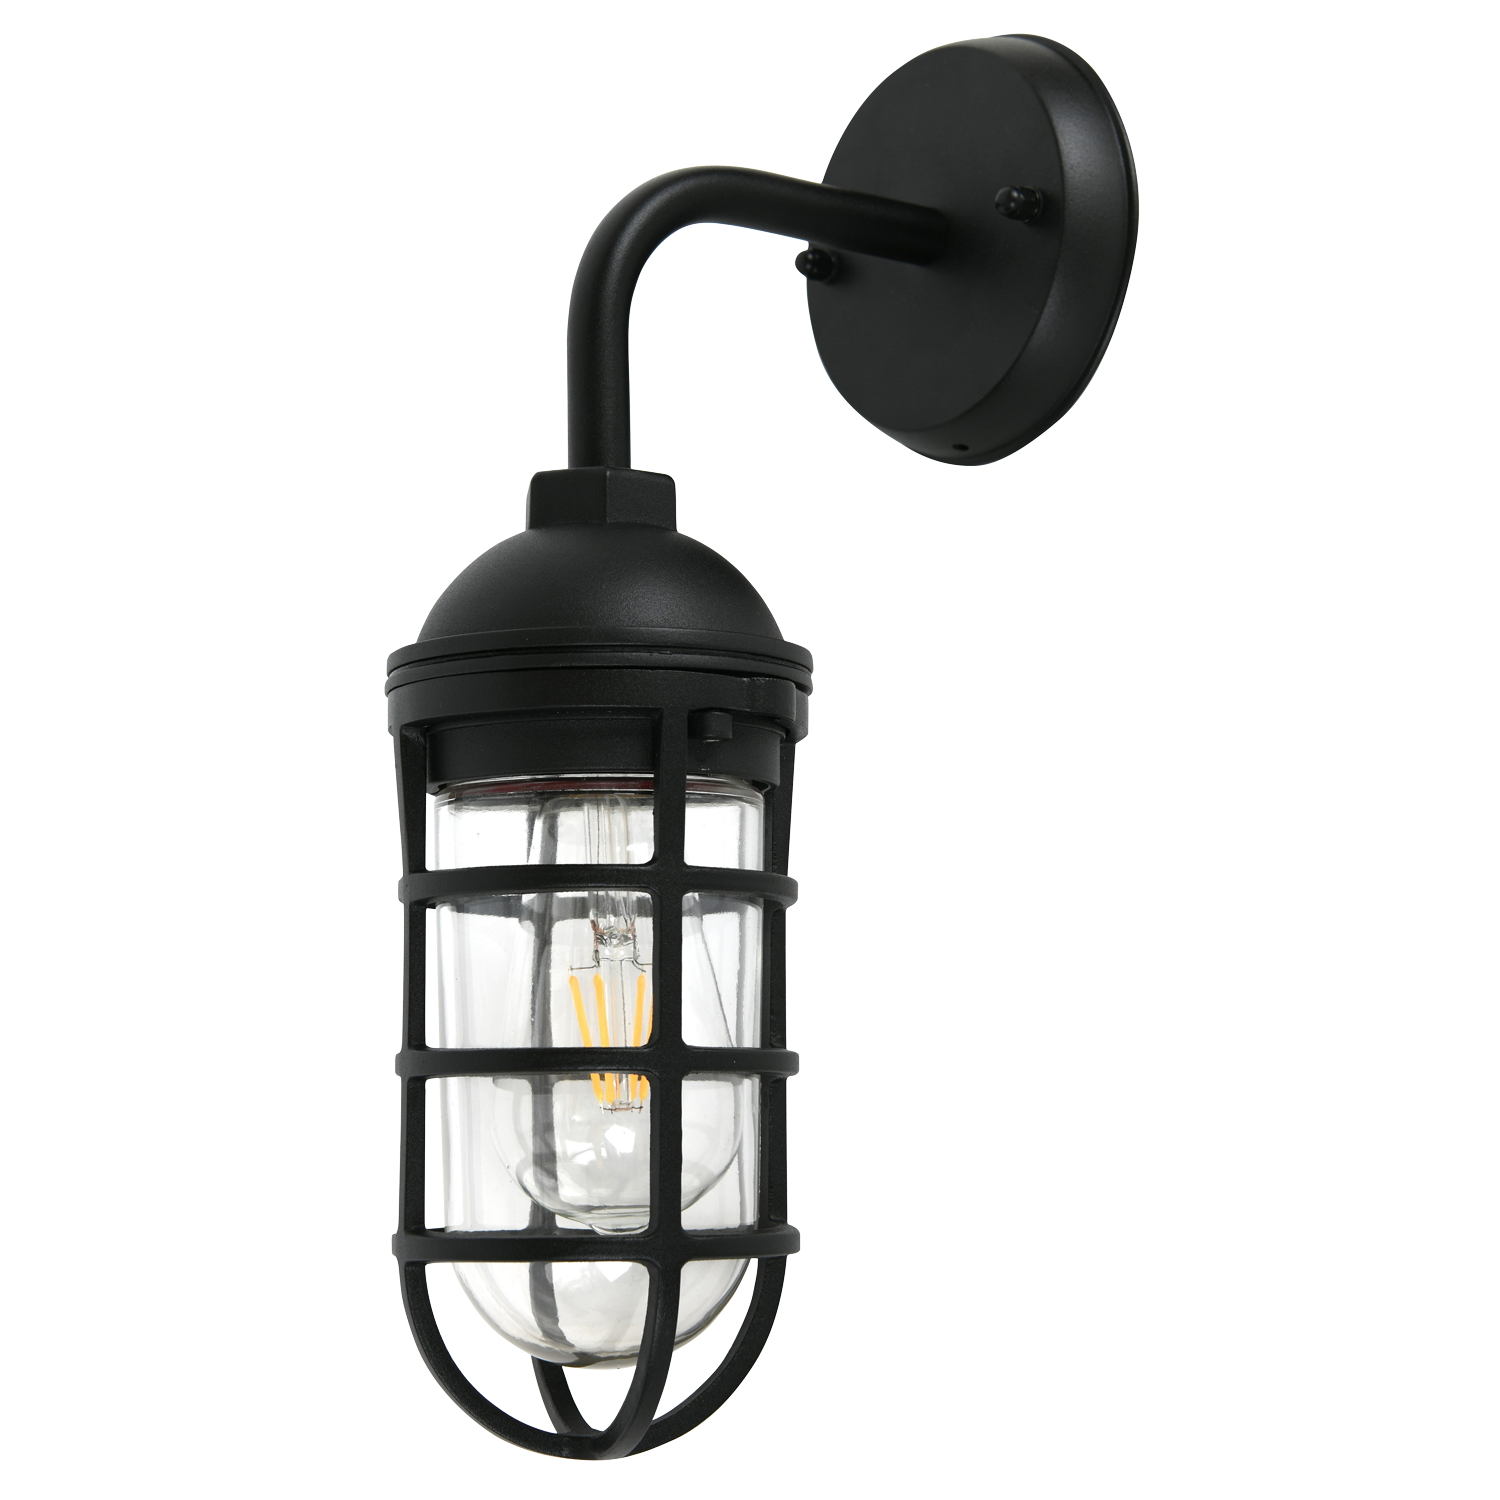 Route Sand Black Outdoor Wall Light